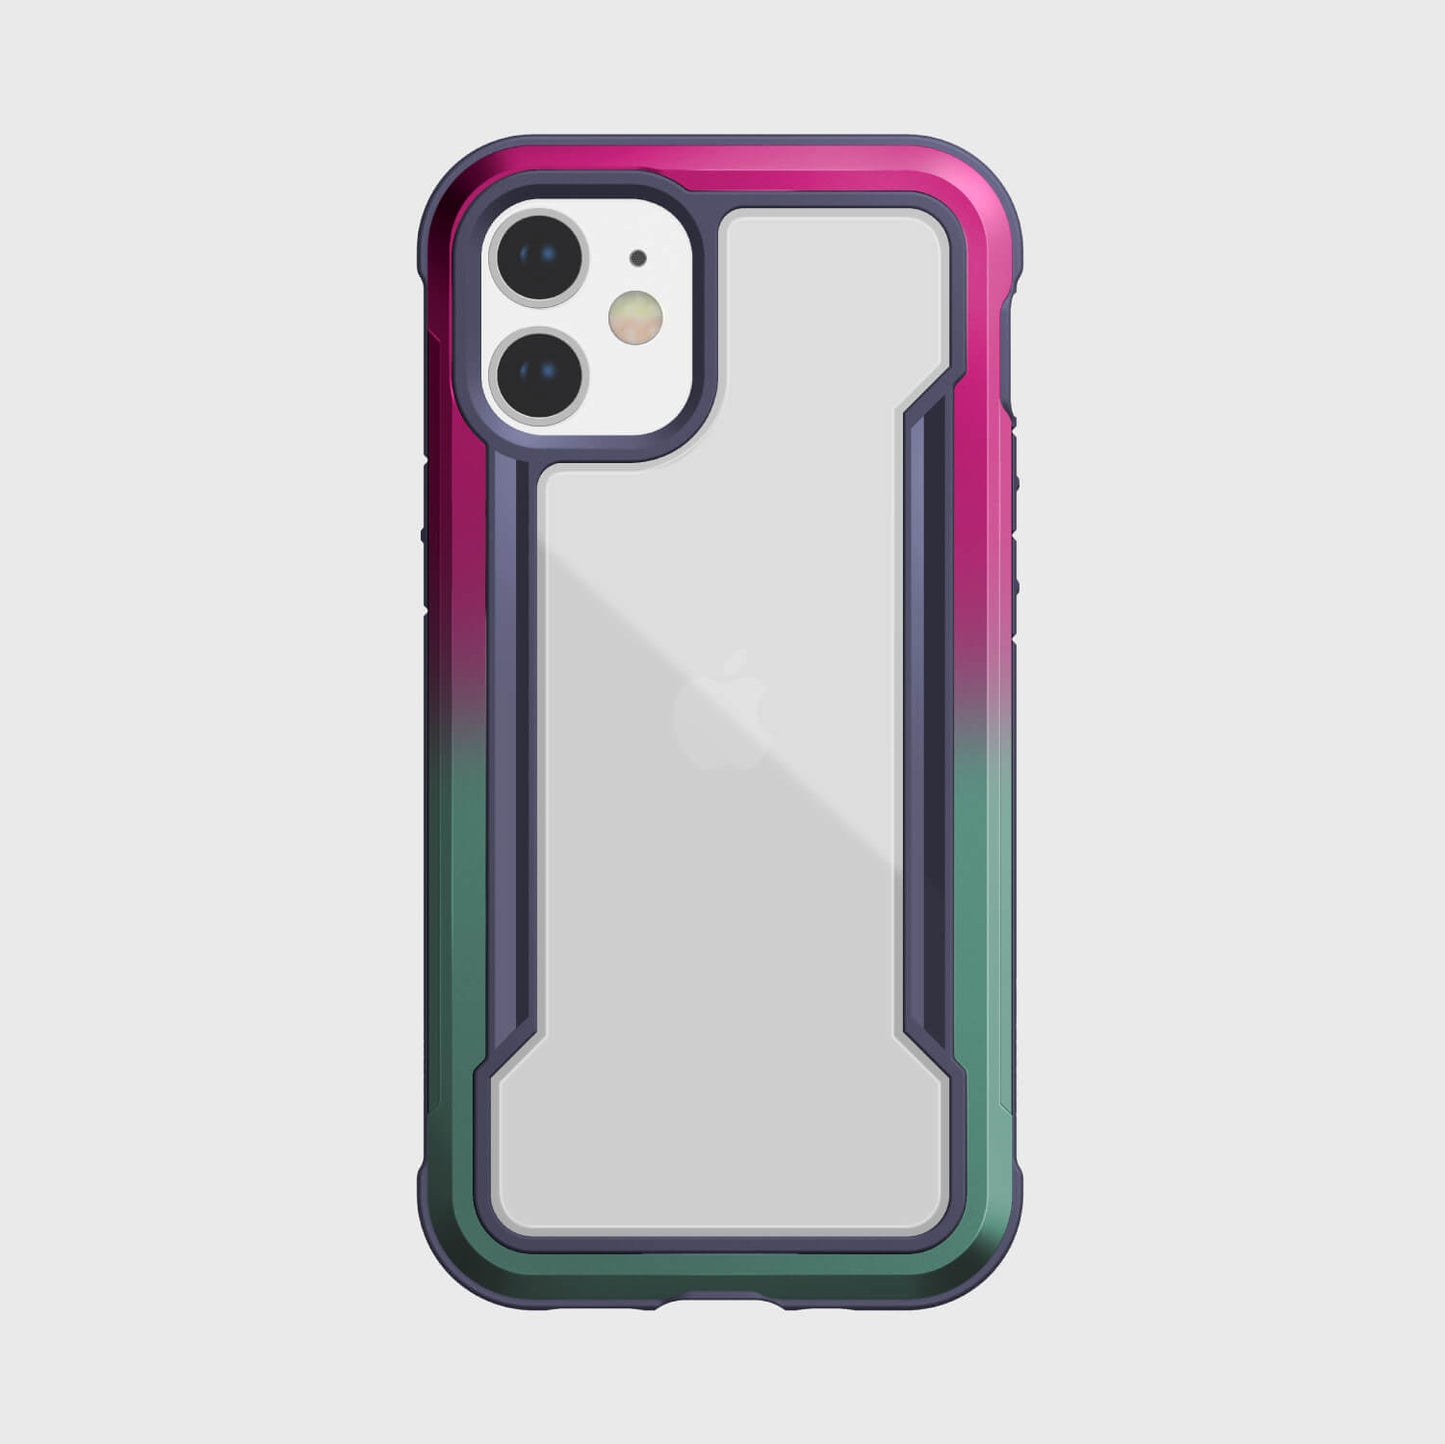 The back view of an iPhone 12 Mini Case - SHIELD by Raptic in pink, green and blue.